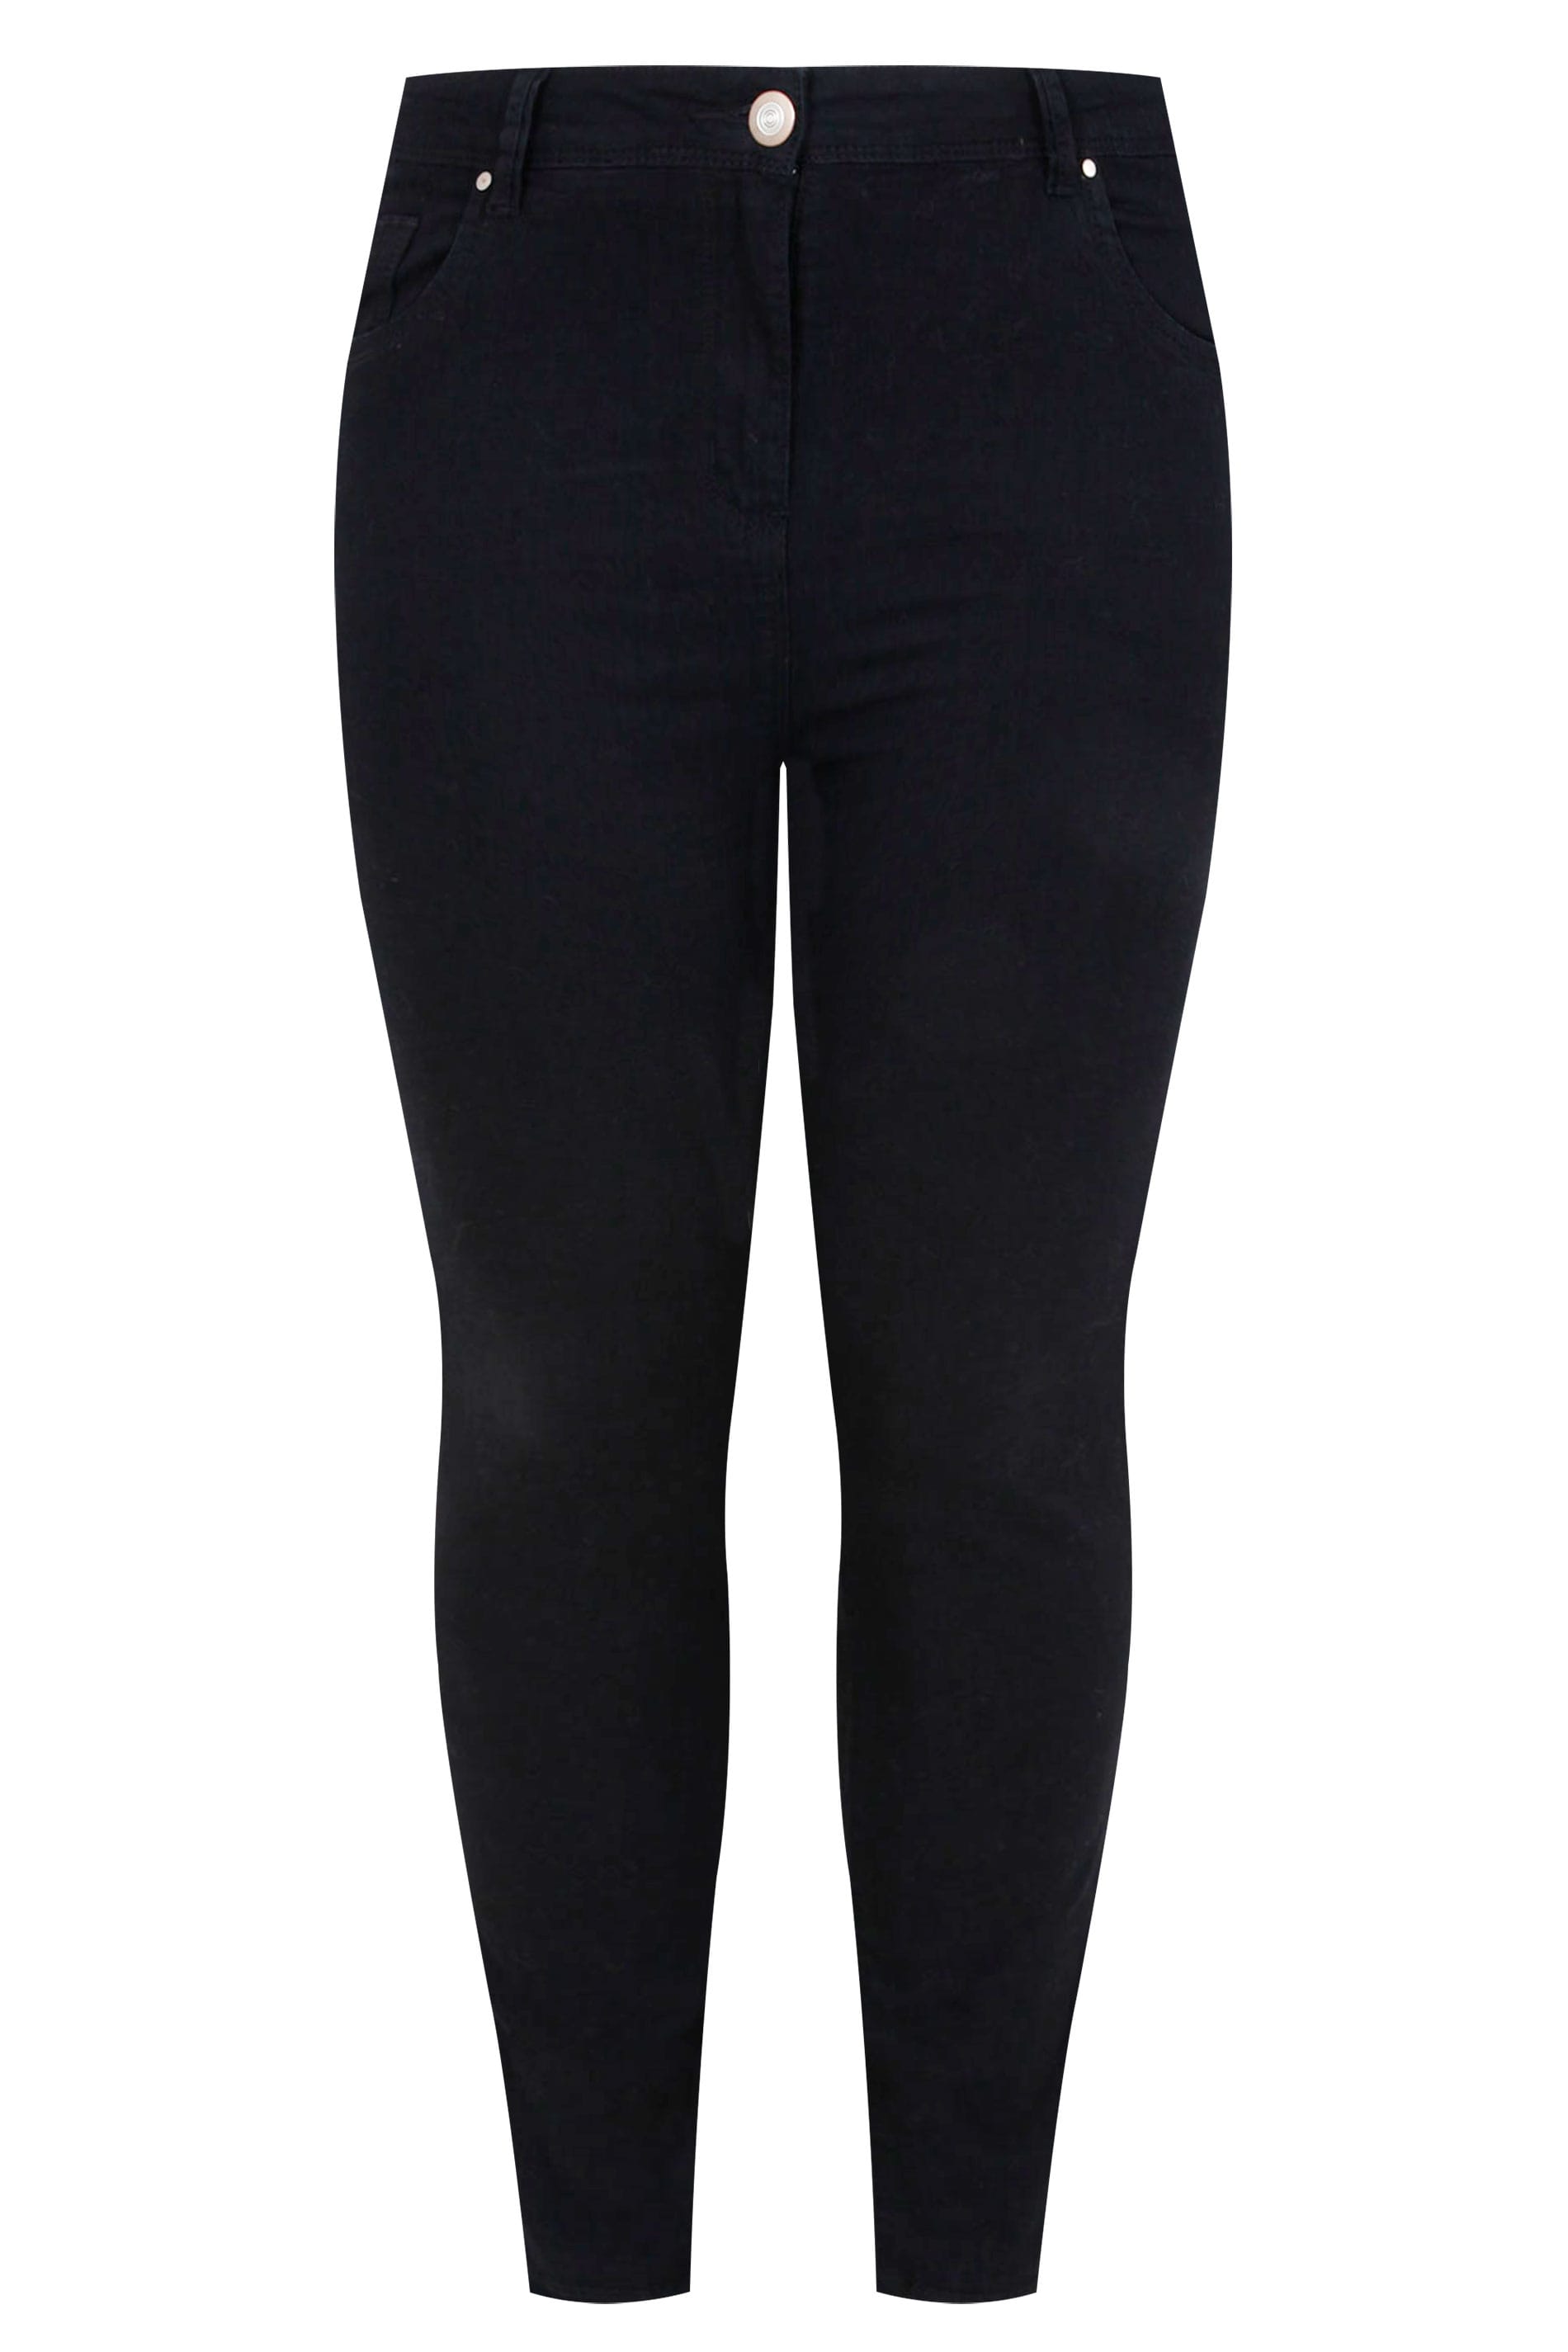 Black Skinny Ava Jeans Plus Size 16 To 32 Yours Clothing